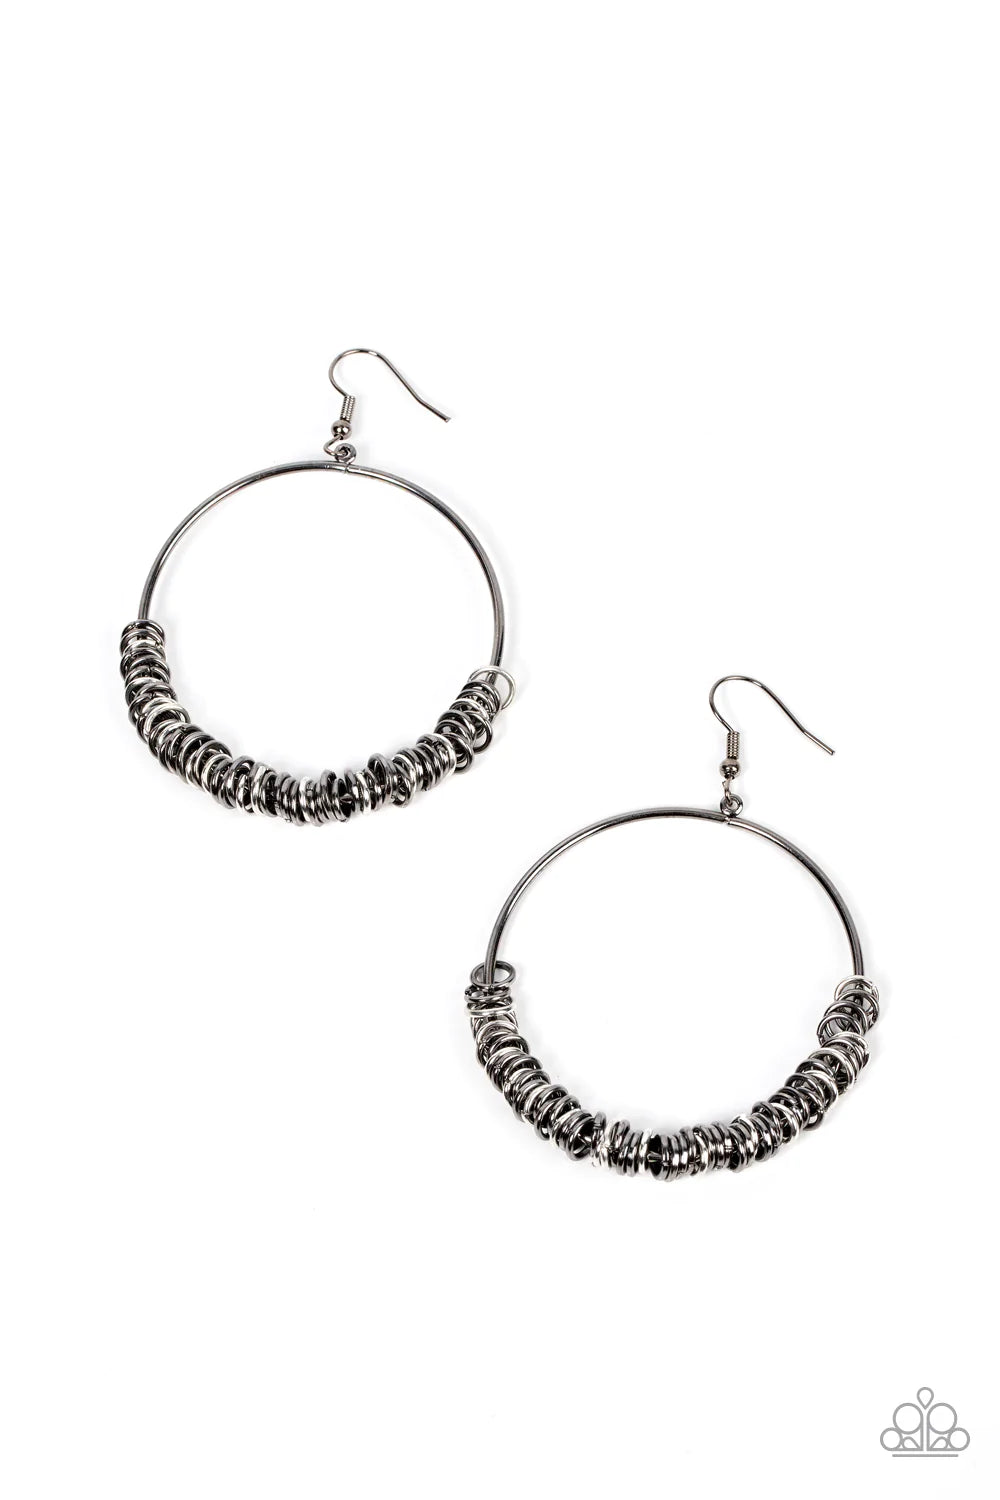 Paparazzi Accessories Retro Ringleader - Multi An abundance of miniature gunmetal and silver rings slide around a simple gunmetal front-facing hoop, resulting in a polished industrial vibe. Earring attaches to a standard fishhook fitting. Sold as one pair